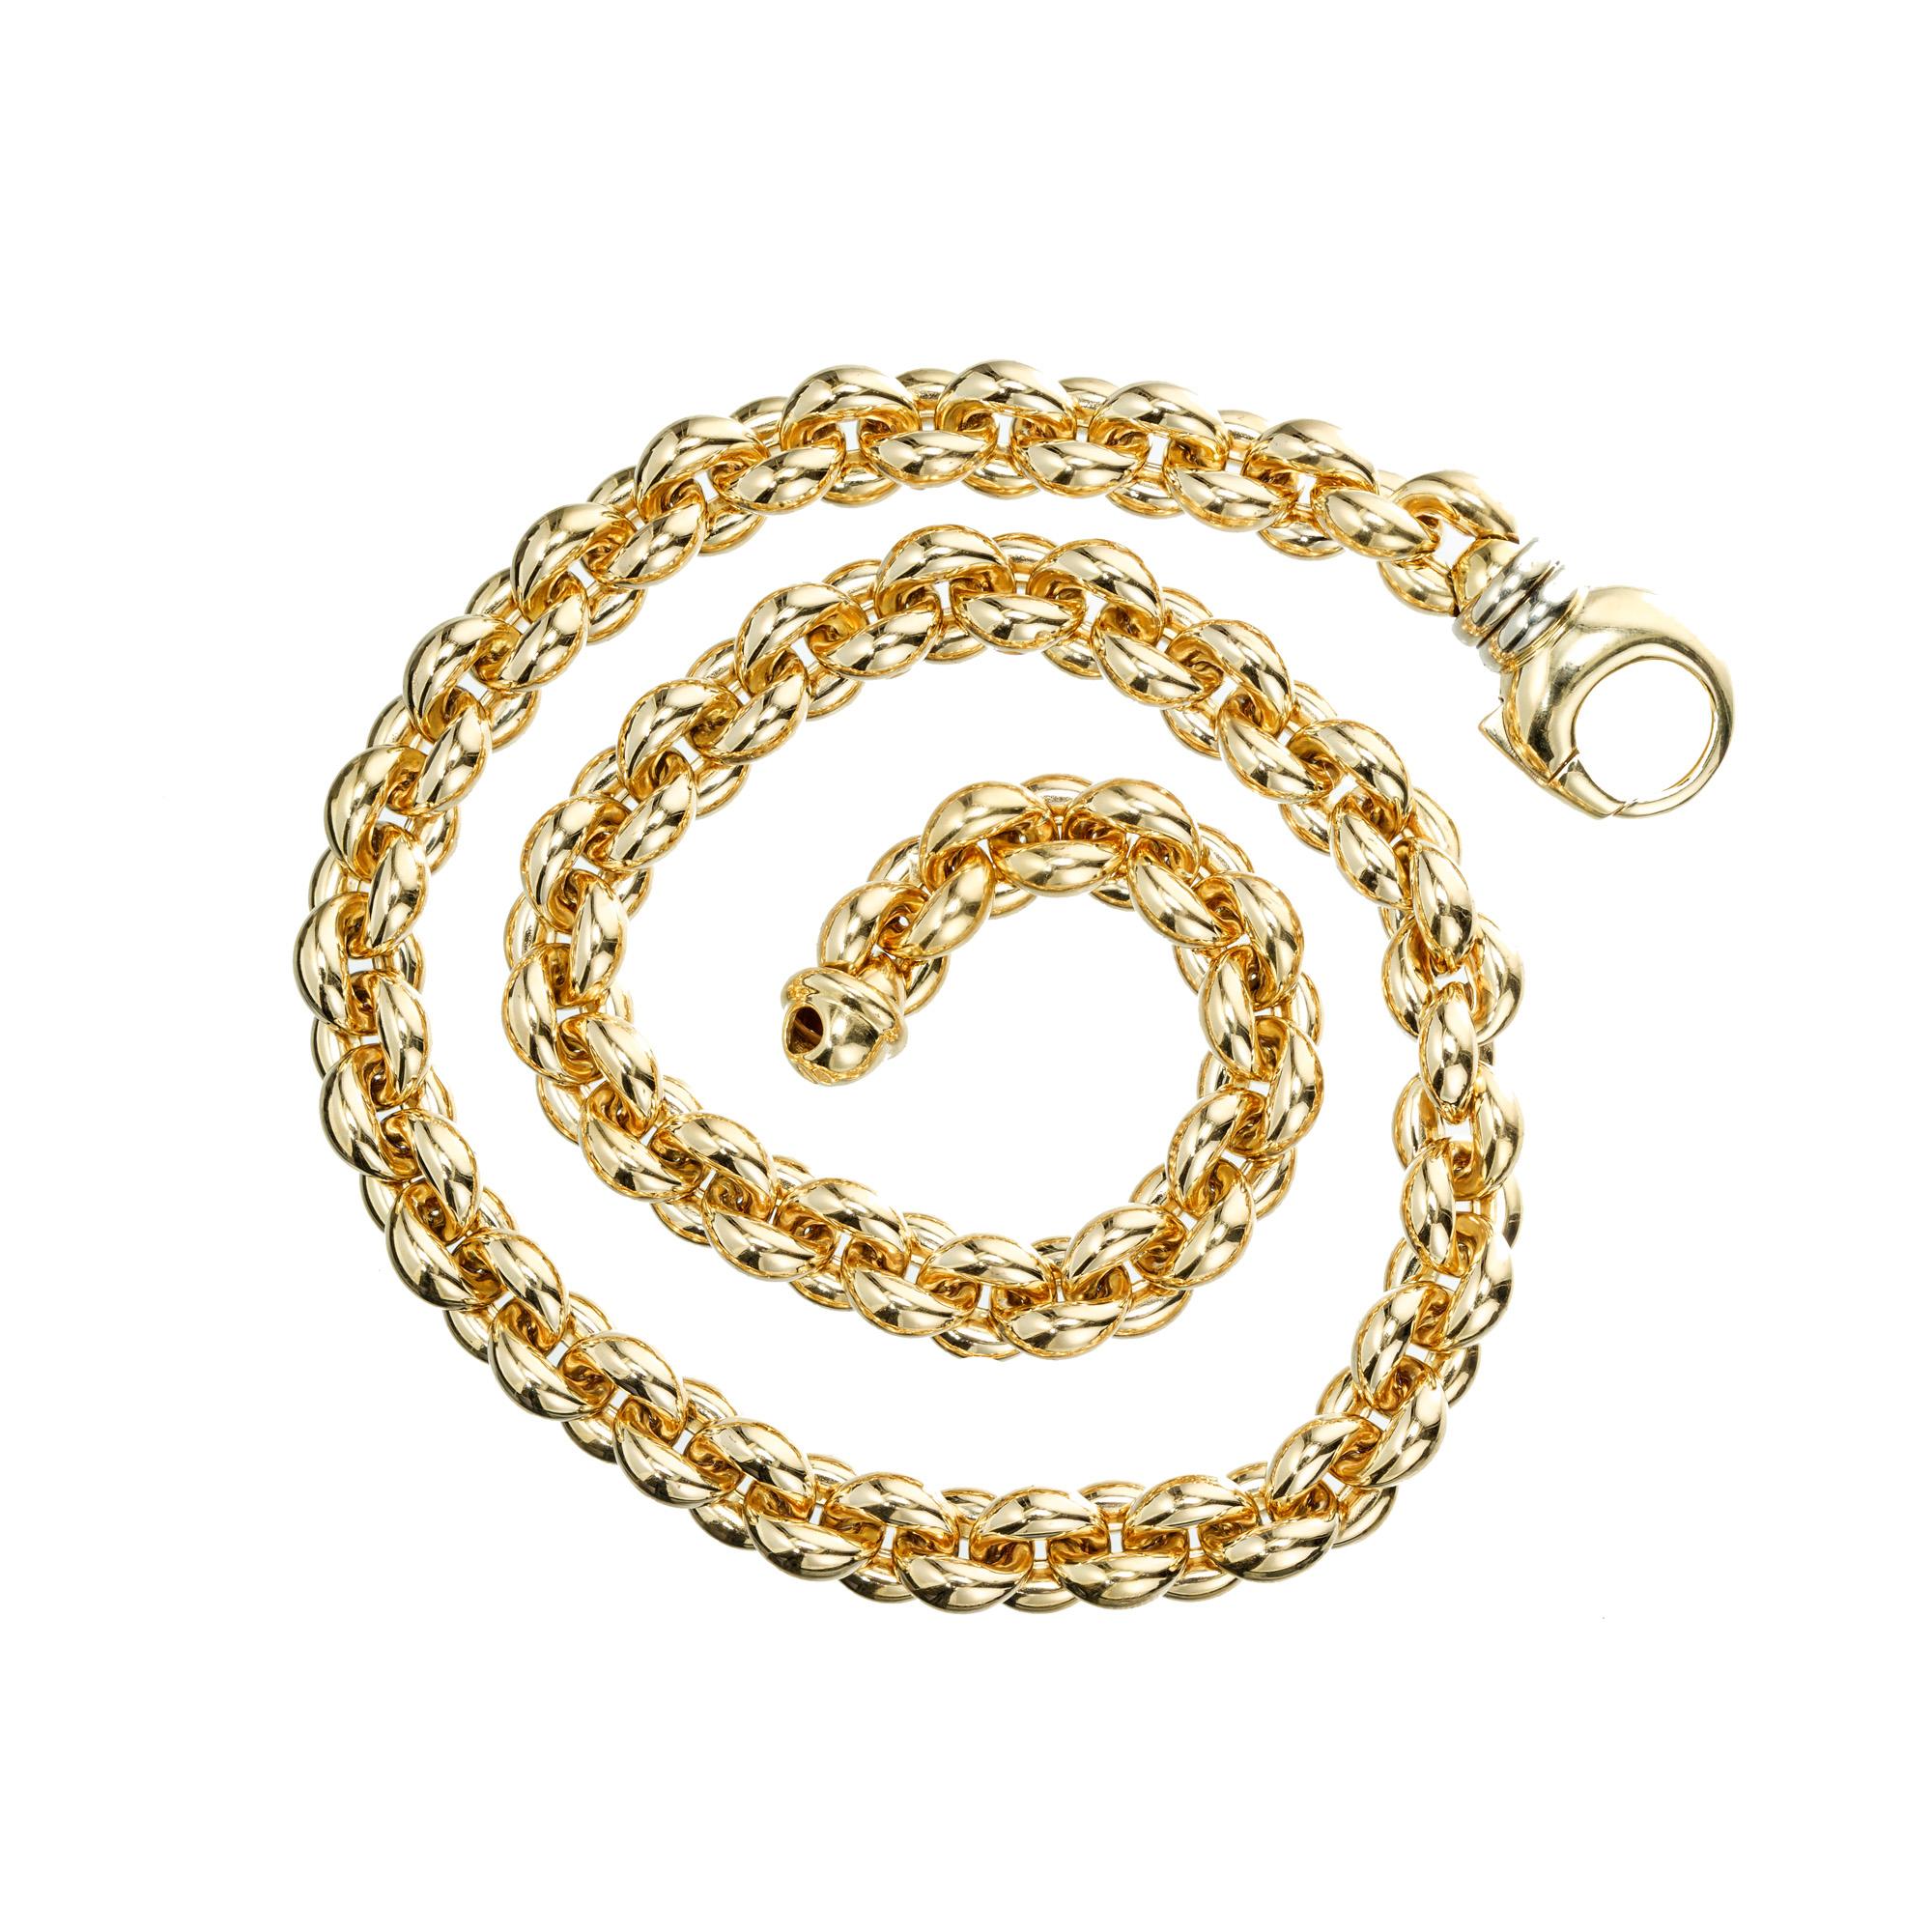 1980's 3 Dimensional Italian chain necklace, a timeless piece of craftsmanship and elegance. Meticulously crafted in Italy, this necklace is made from rich 18 yellow gold links. The three-dimensional design adds a unique element to this already